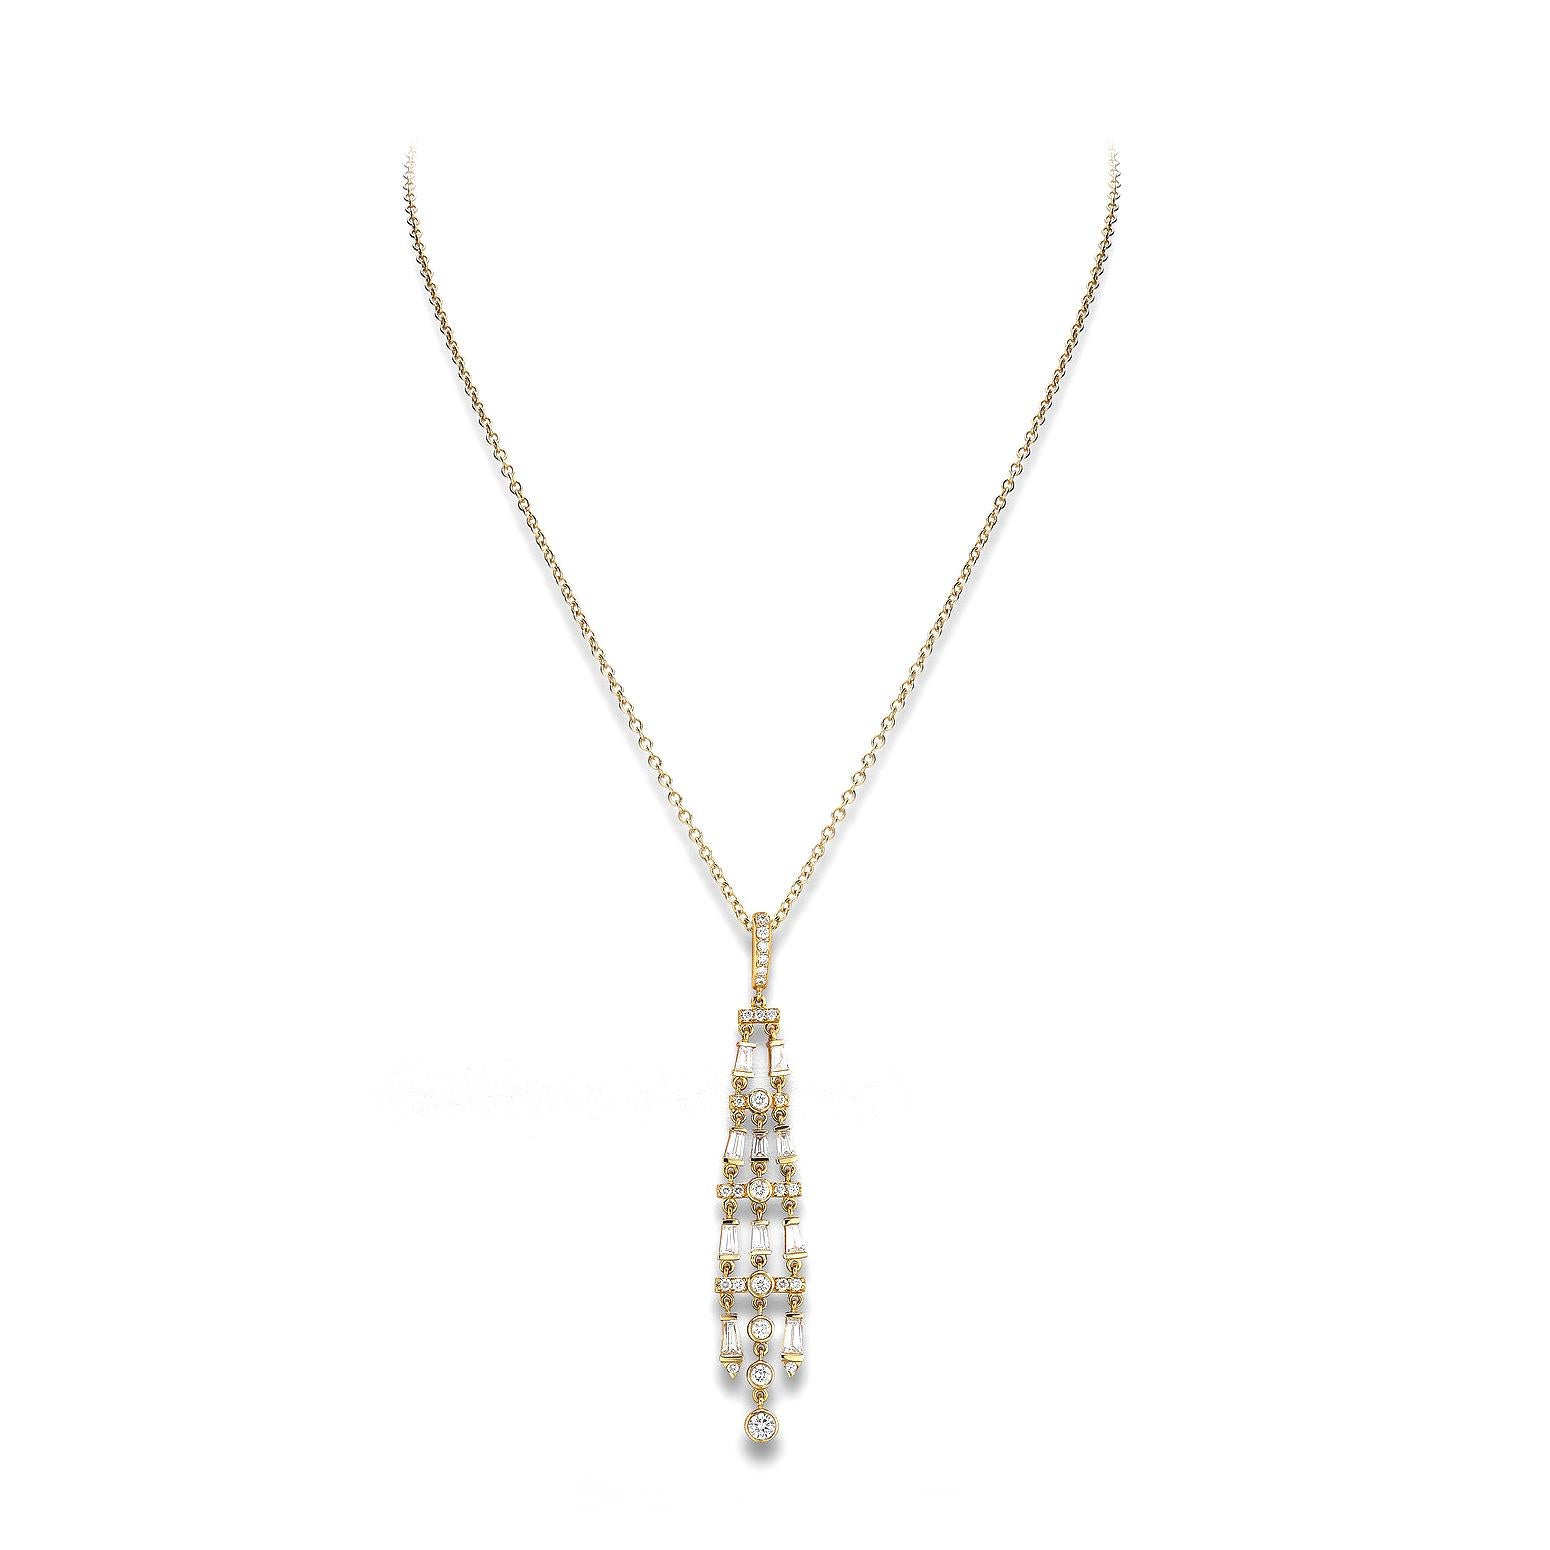 Pendant in 18kt yellow gold set with 27 diamonds 0.52 cts and 10 baguette cut diamonds 0.77 cts